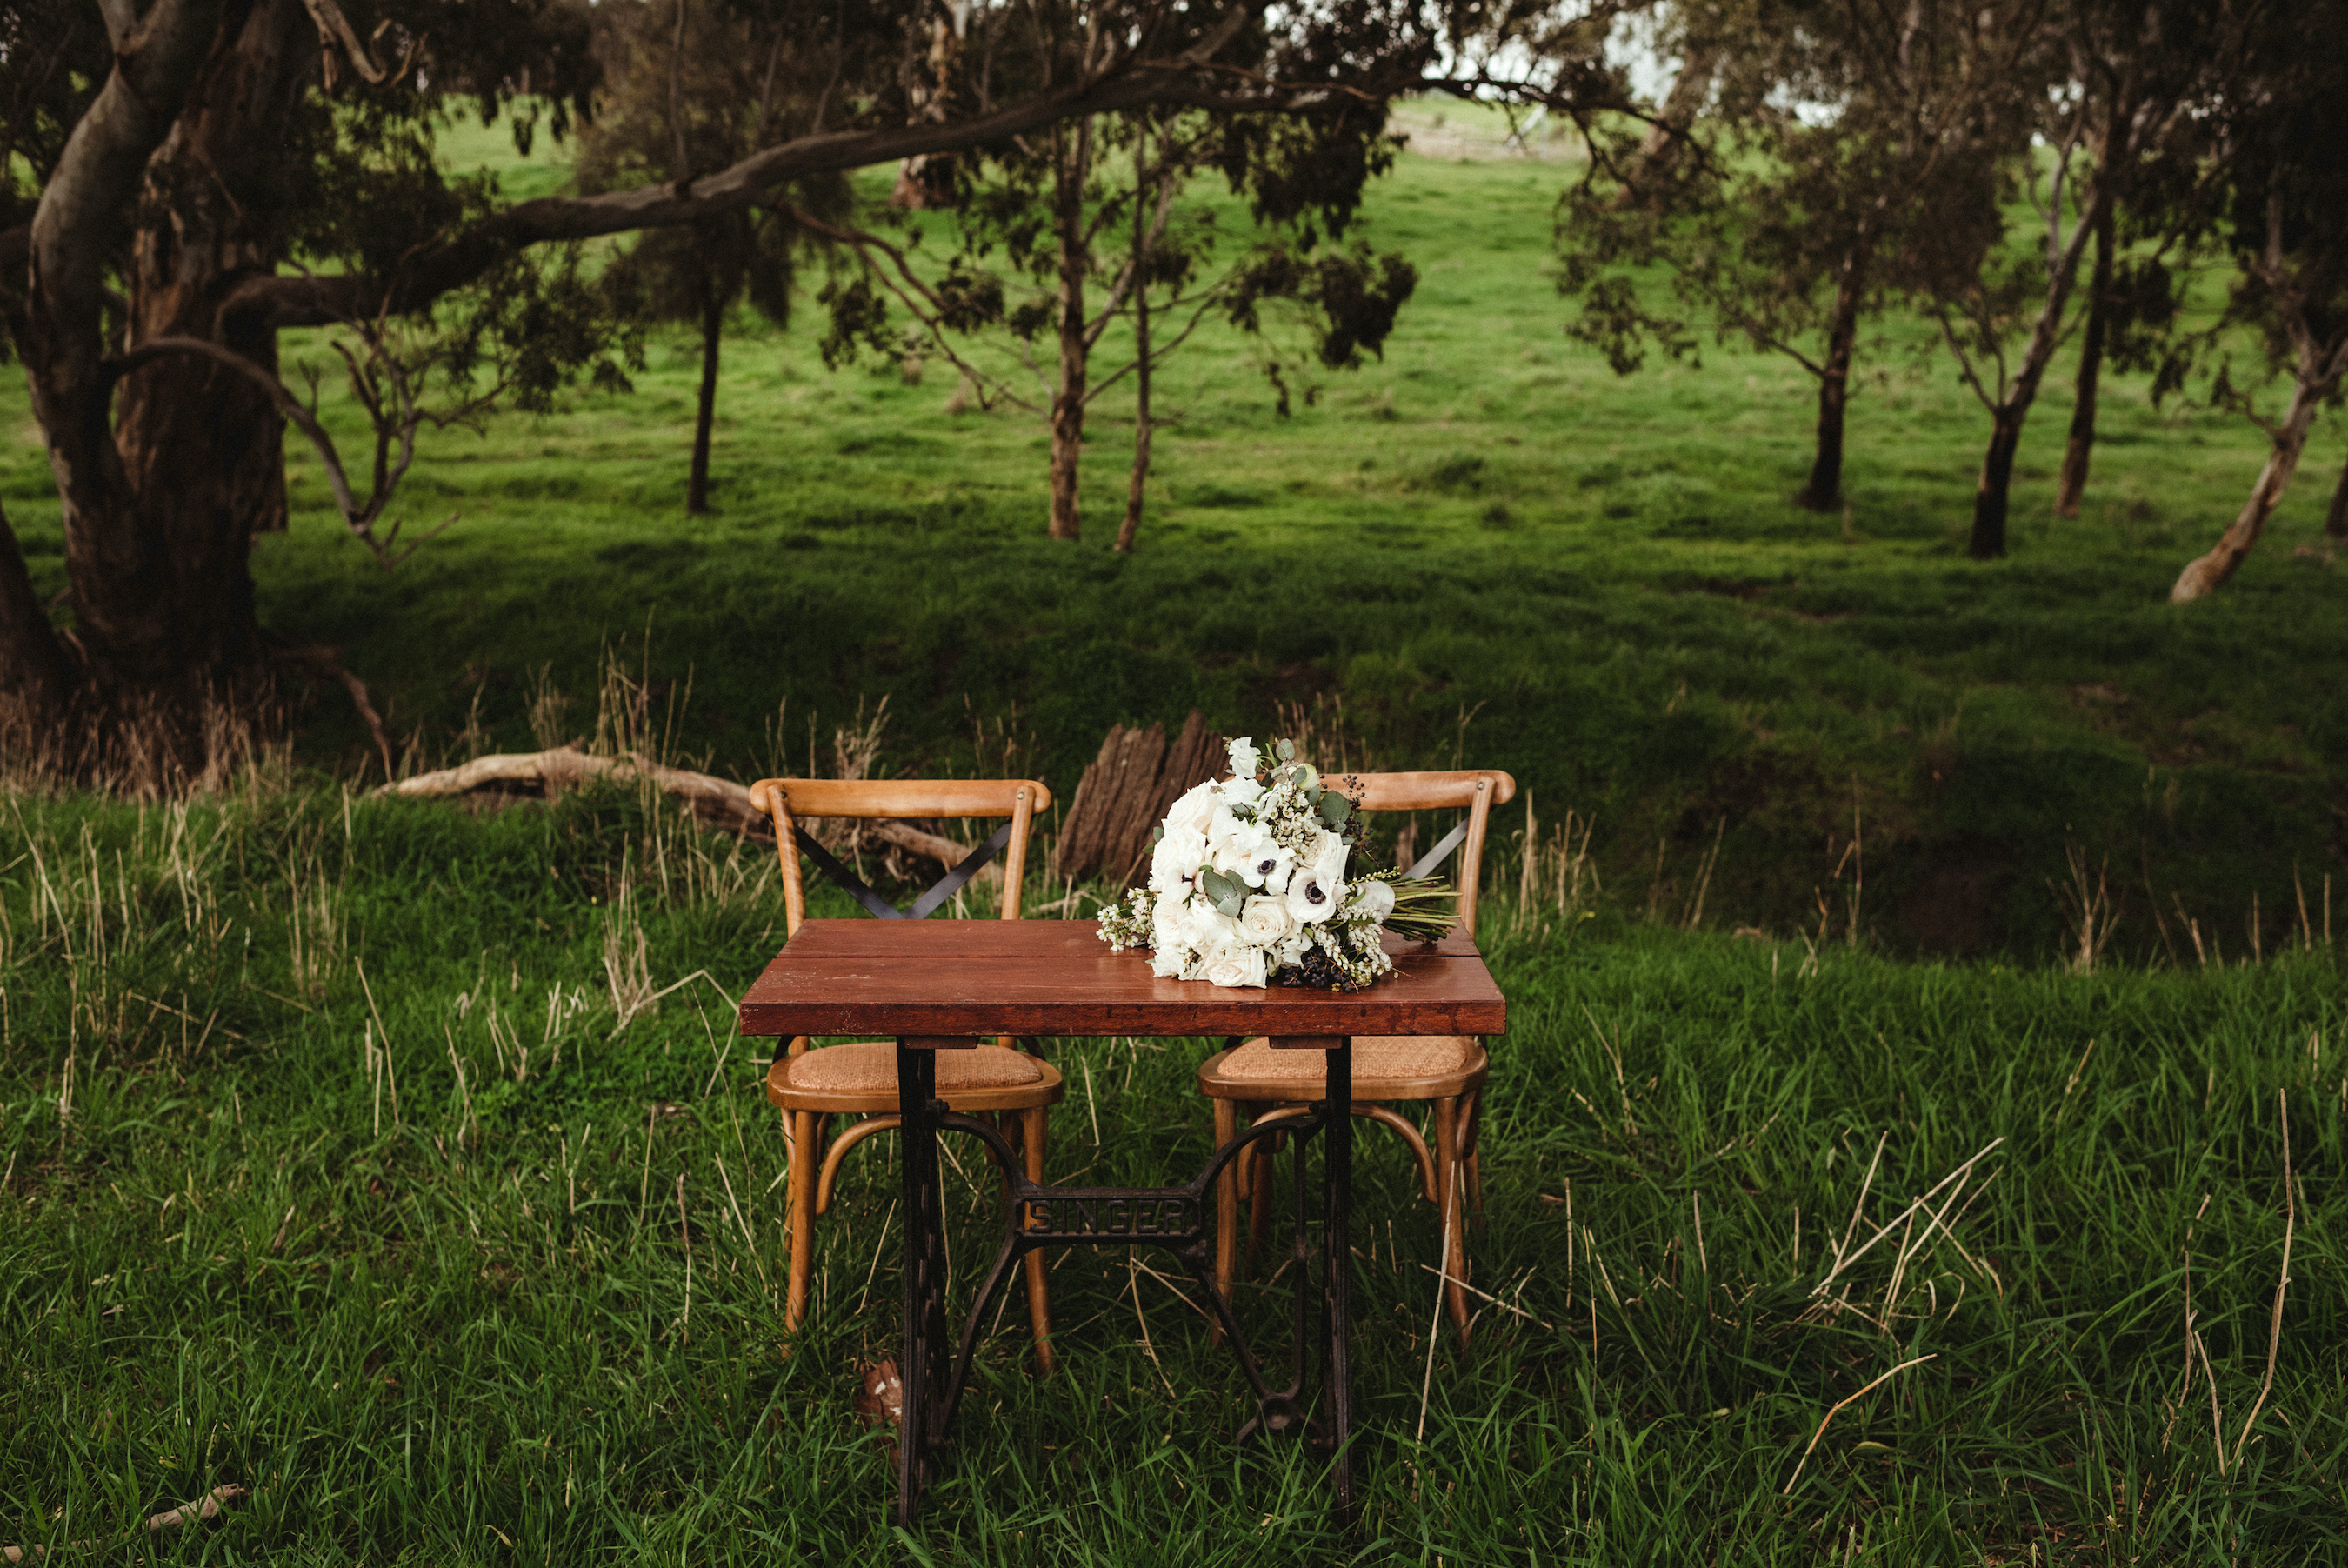 Glen Lea Homestead Styled Shoot, Historic Dry Hire Wedding Venue in the Adelaide Hills. A rustic farm setting now available for ceremonies and receptions.